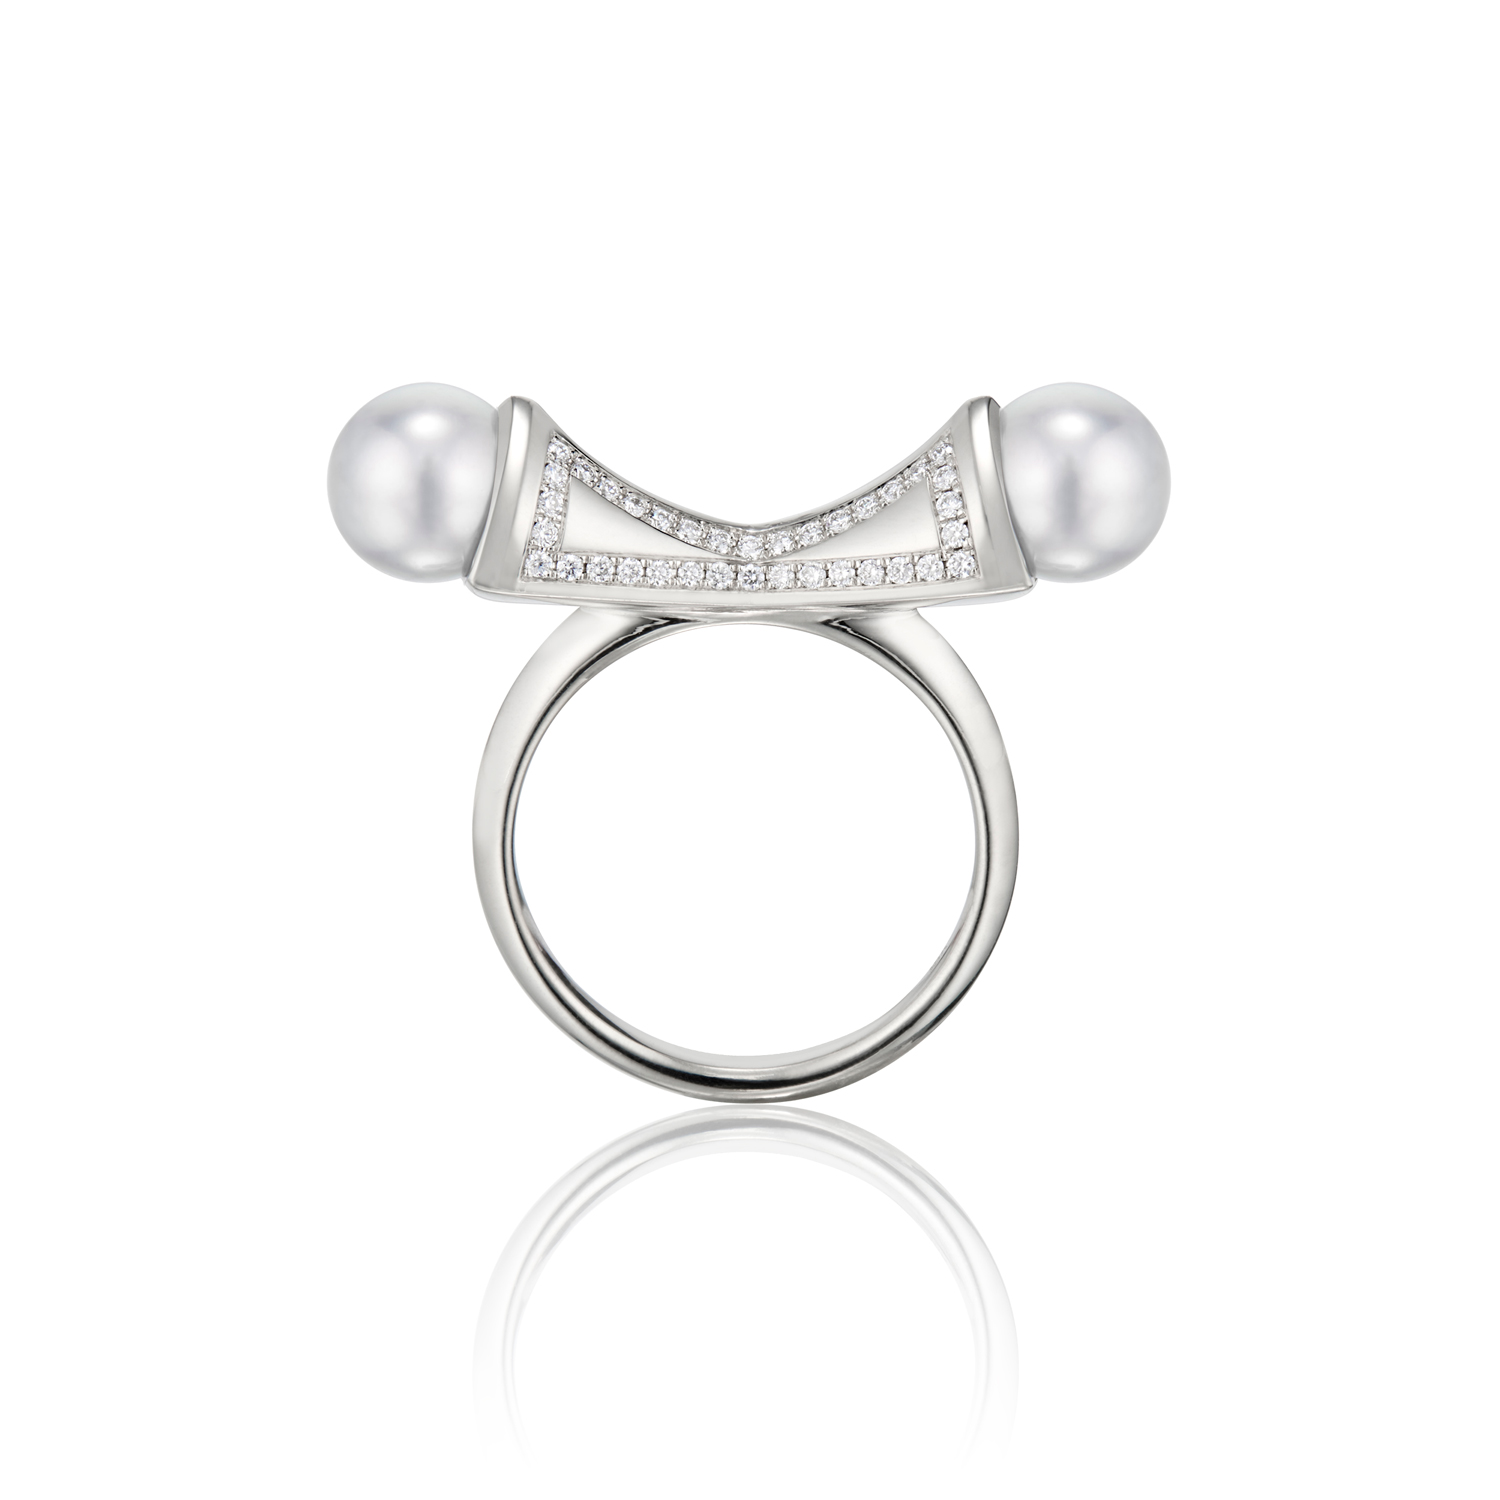 This is a front facing photo of the Pearl Temple Bow Ring by Renisis. It is crafted in 18K white gold with blue Akoya Pearls and diamond patterns